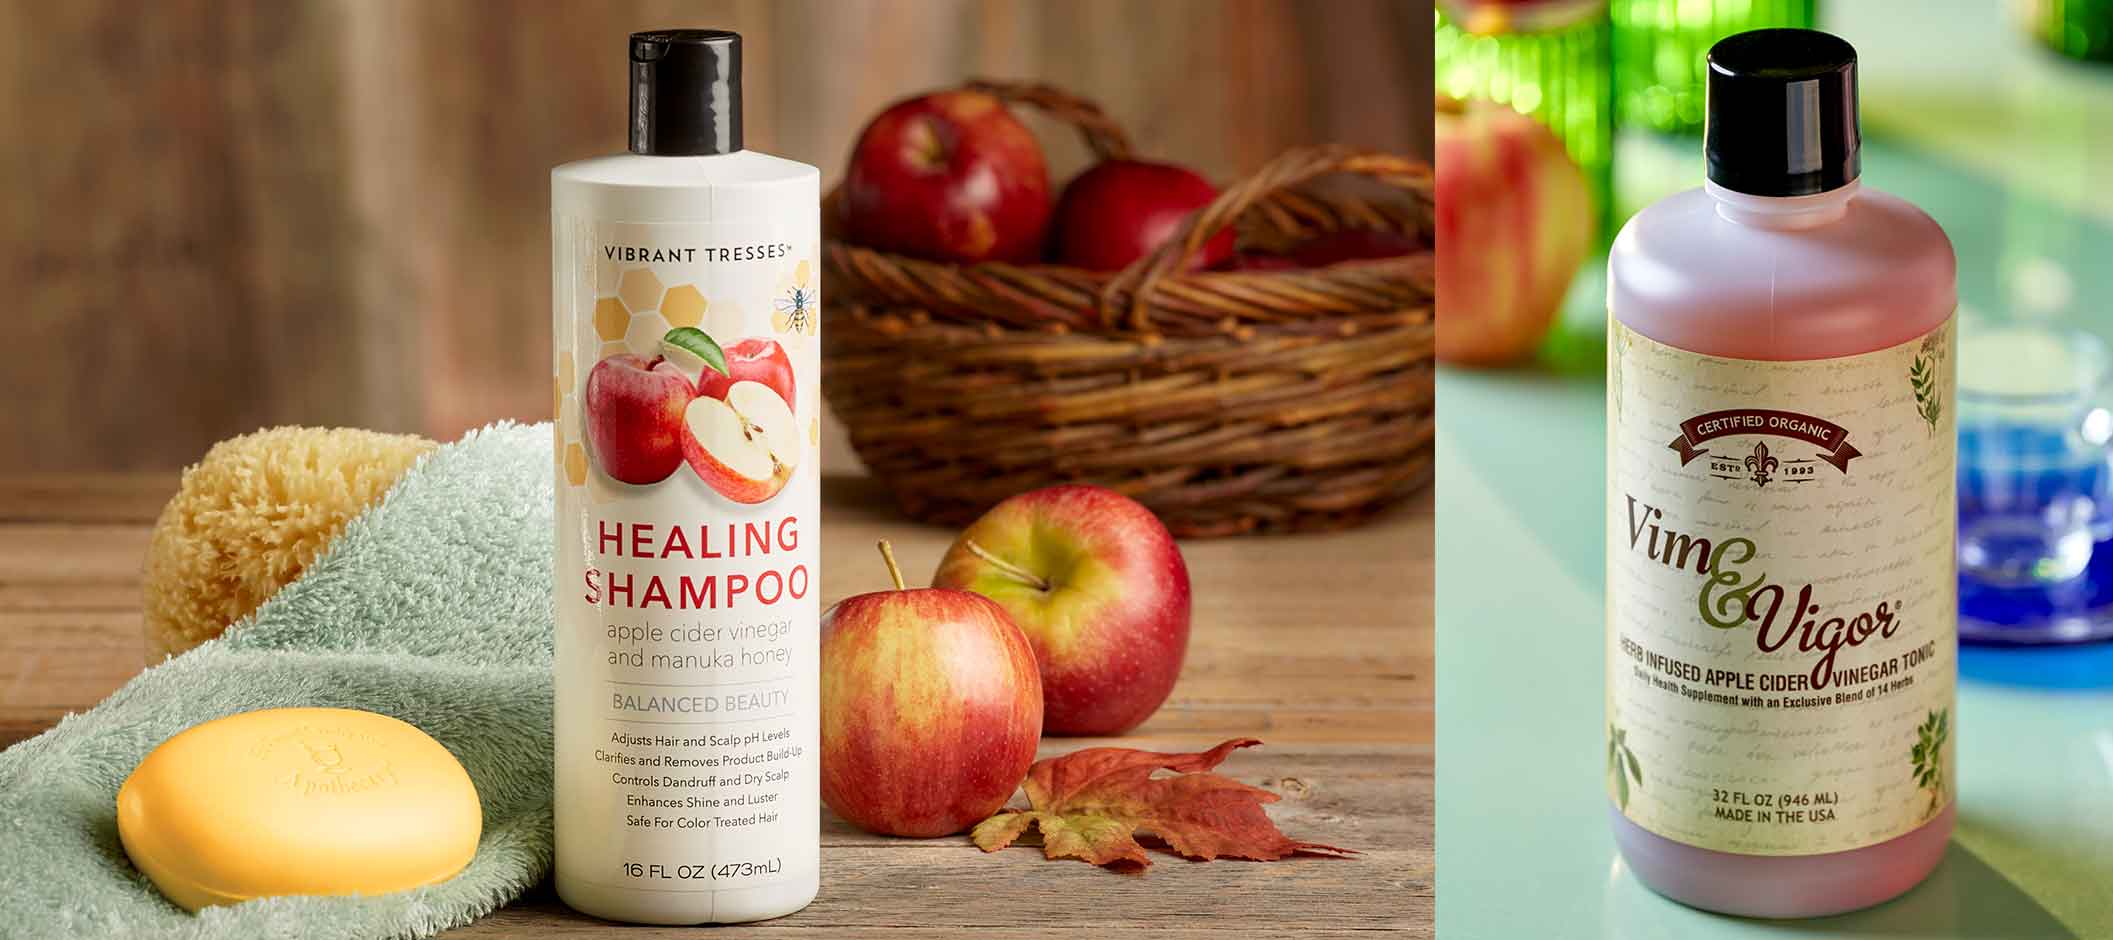 Apple cider vinegar products from The Vermont Country Store